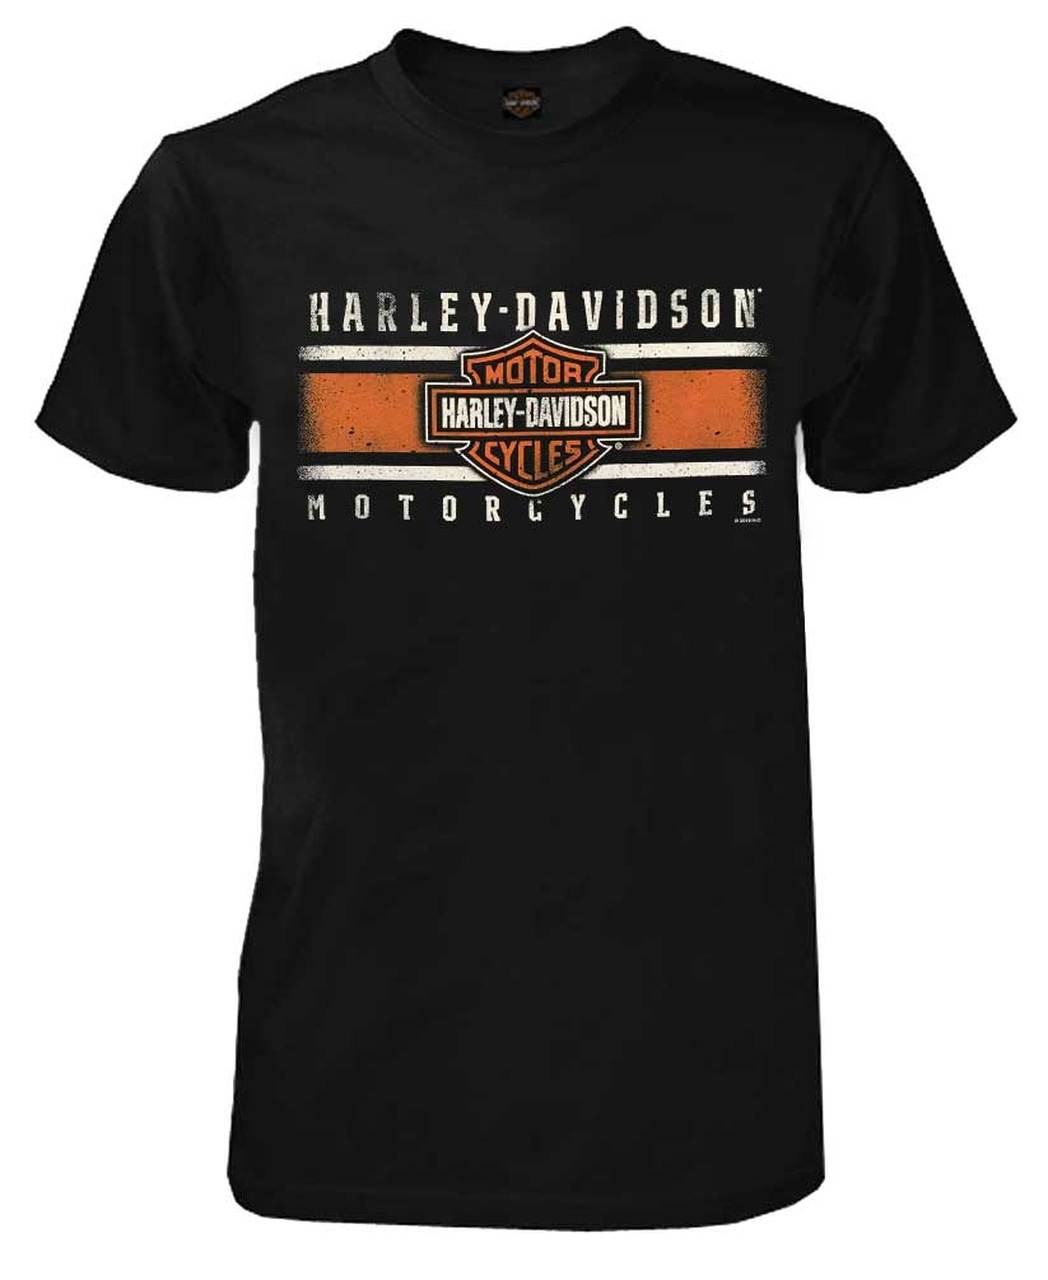 Harley Davidson Hommes Custom Iconic Bands Manches Courtes Col Rond Tee Shirt Noir 30298977 